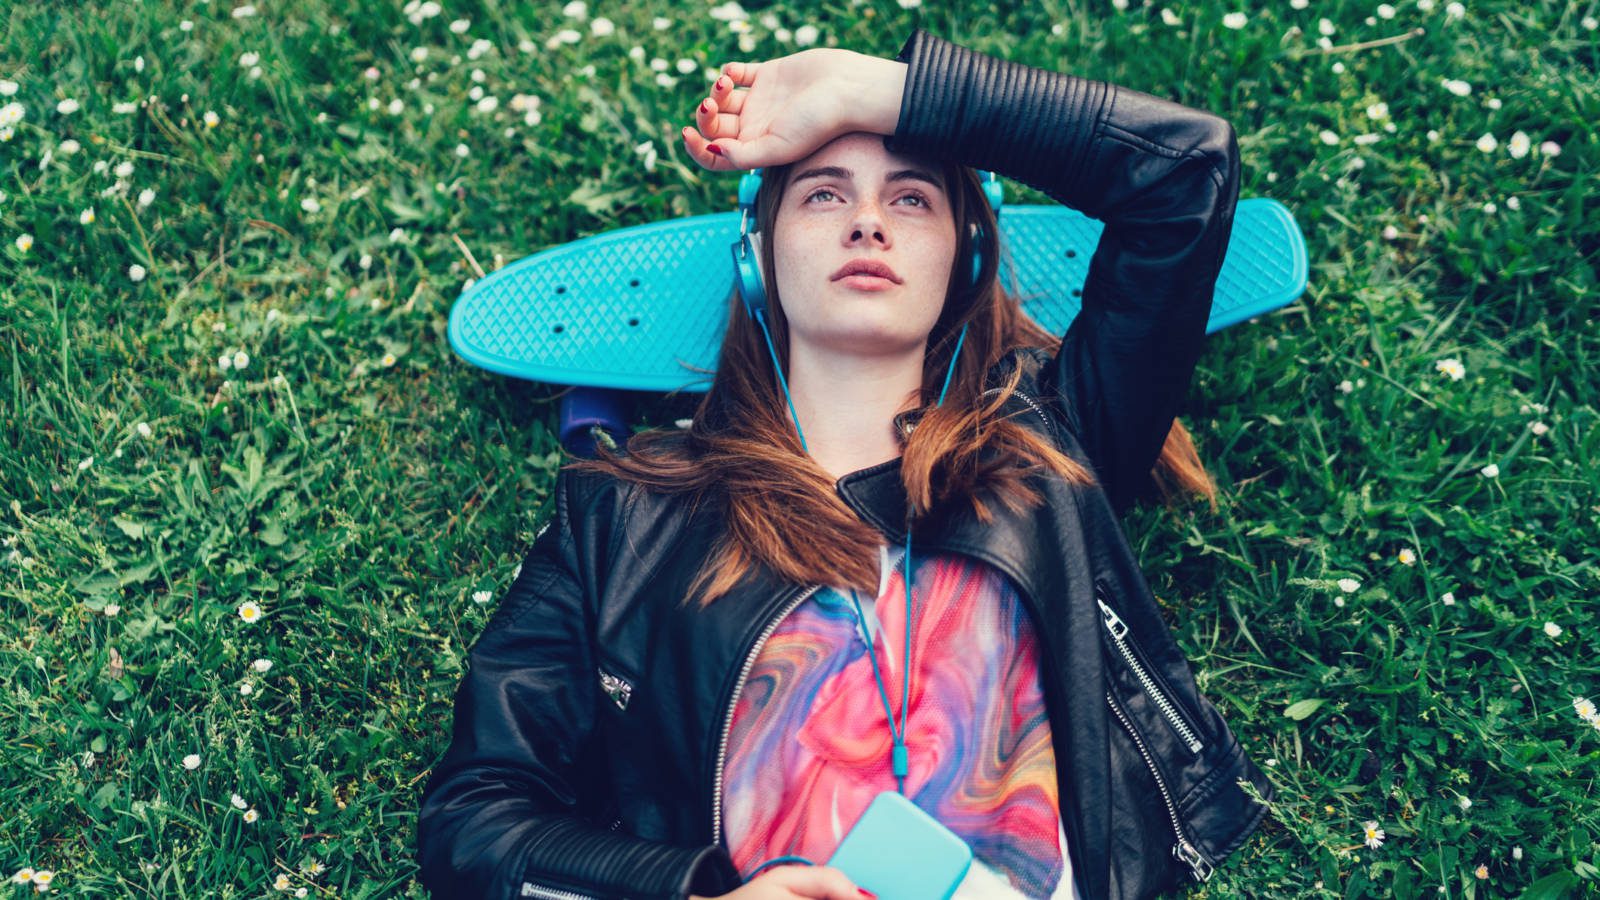 Student listening to music through headphones and laying on a skateboard in the grass